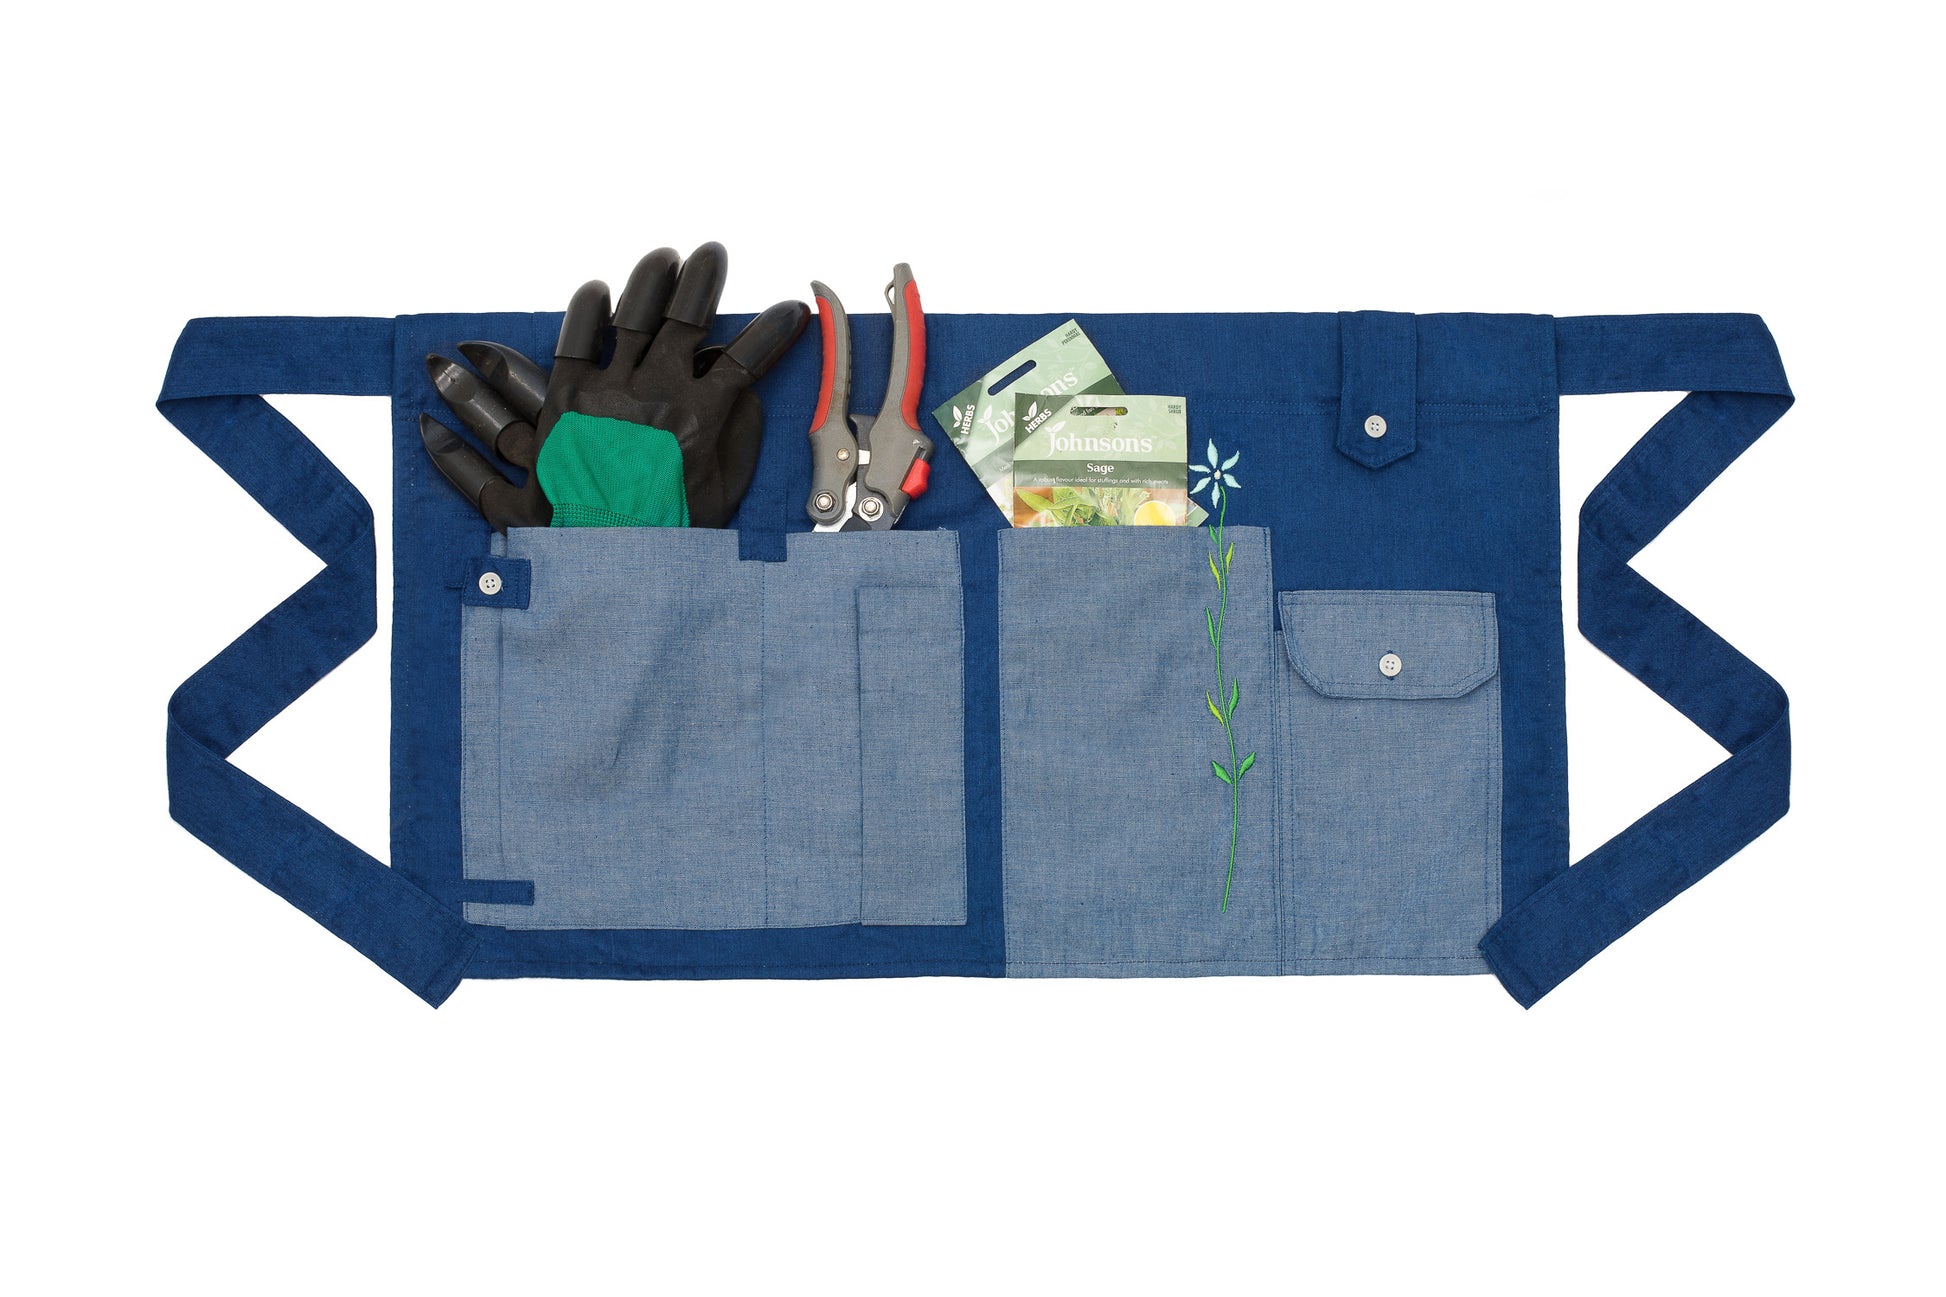 Tool Belt made in Japanese Denim, for the garden or multifunctional, by Saywood. Garden tools are tucked into the pockets of the multifunctional tool belt.